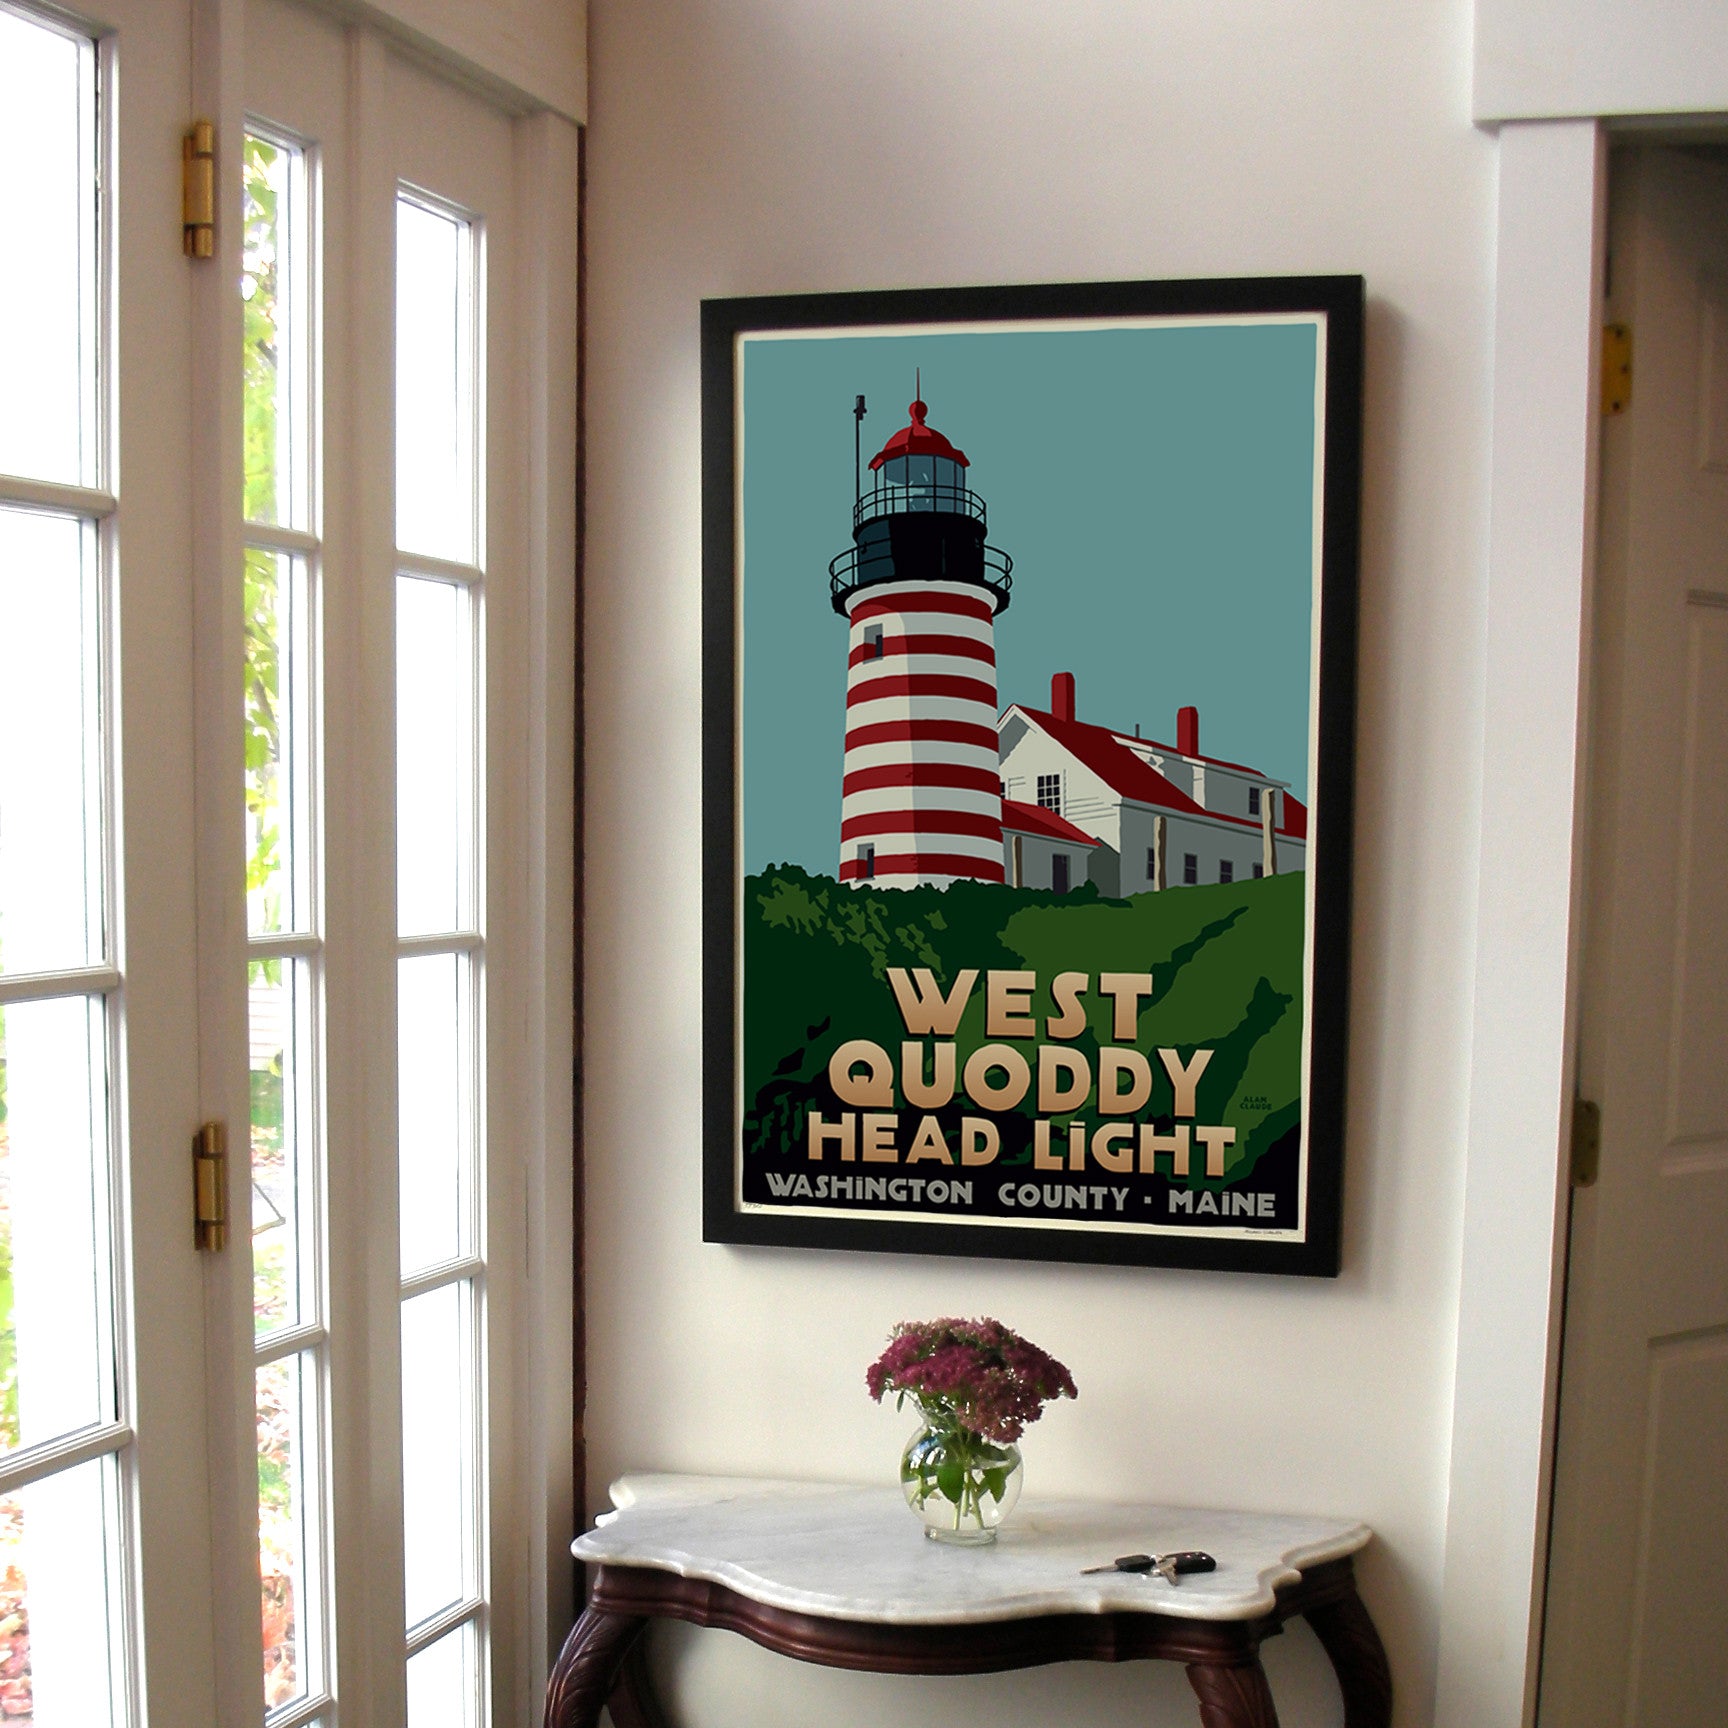 West Quoddy Head Light Art Print 24" x 36" Framed Travel Poster By Alan Claude - Maine